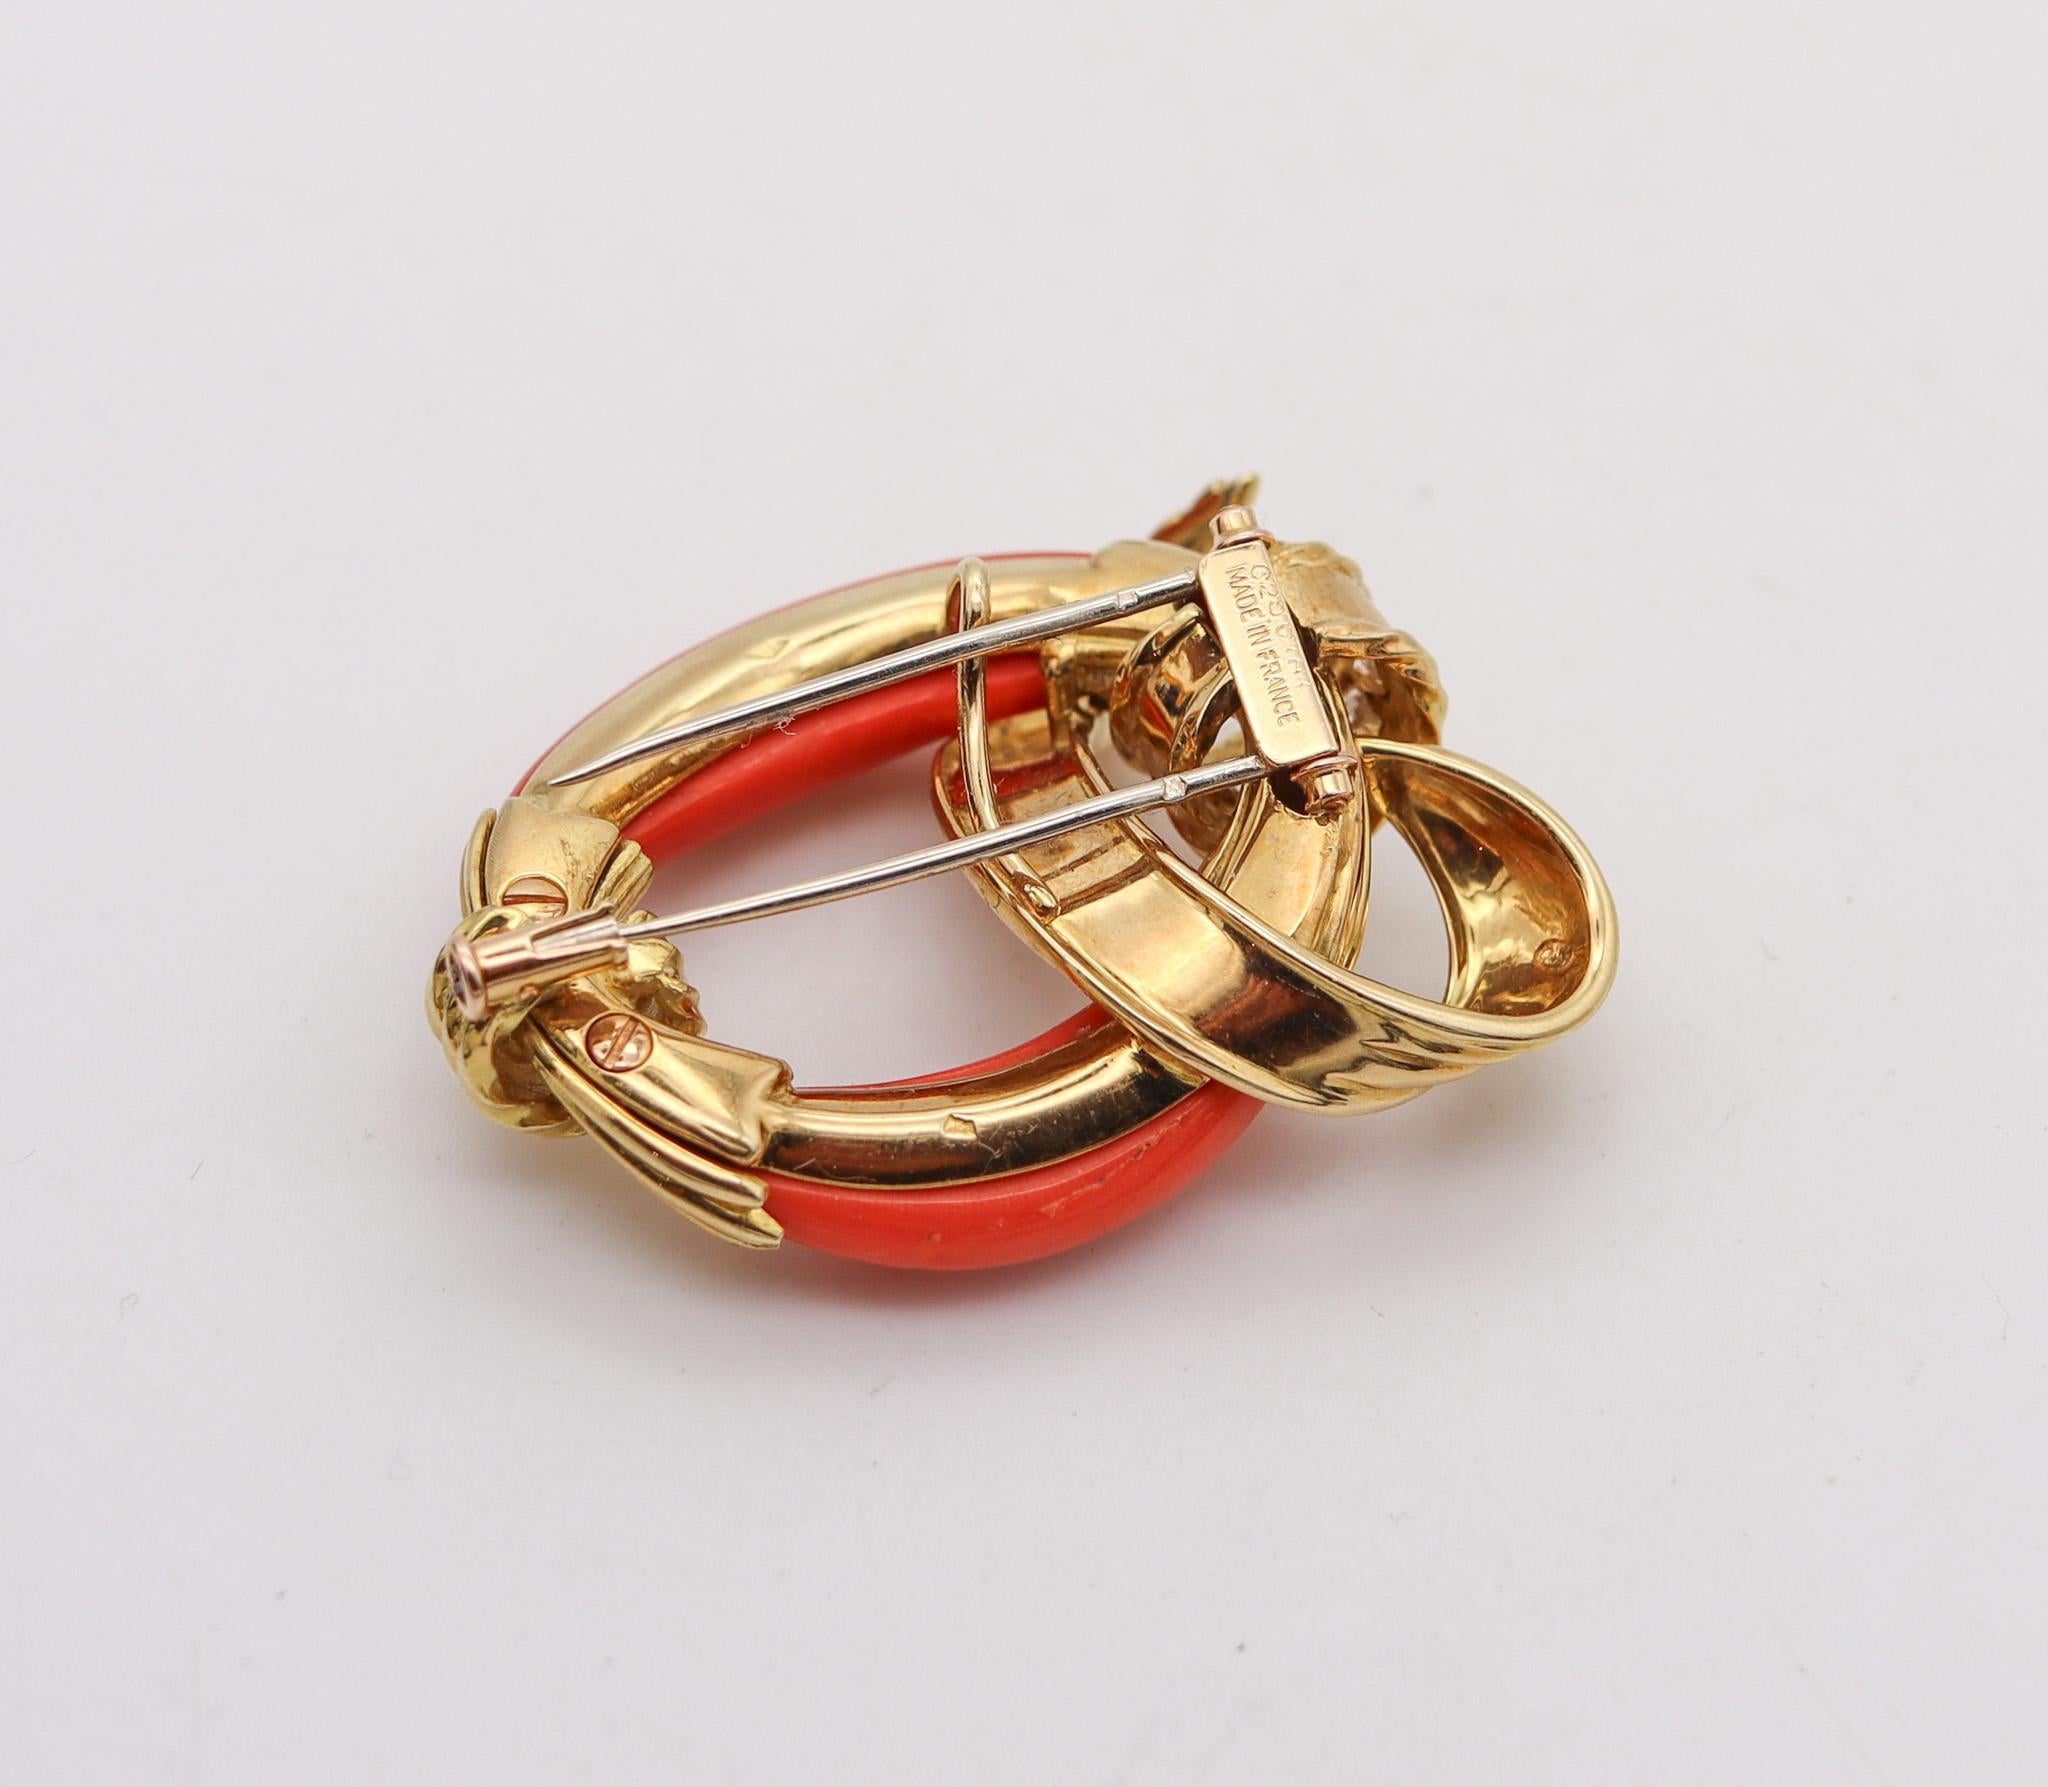 Chaumet Paris 1960 Modernist Pendant Brooch In 18Kt Gold With Coral And Diamonds In Excellent Condition For Sale In Miami, FL